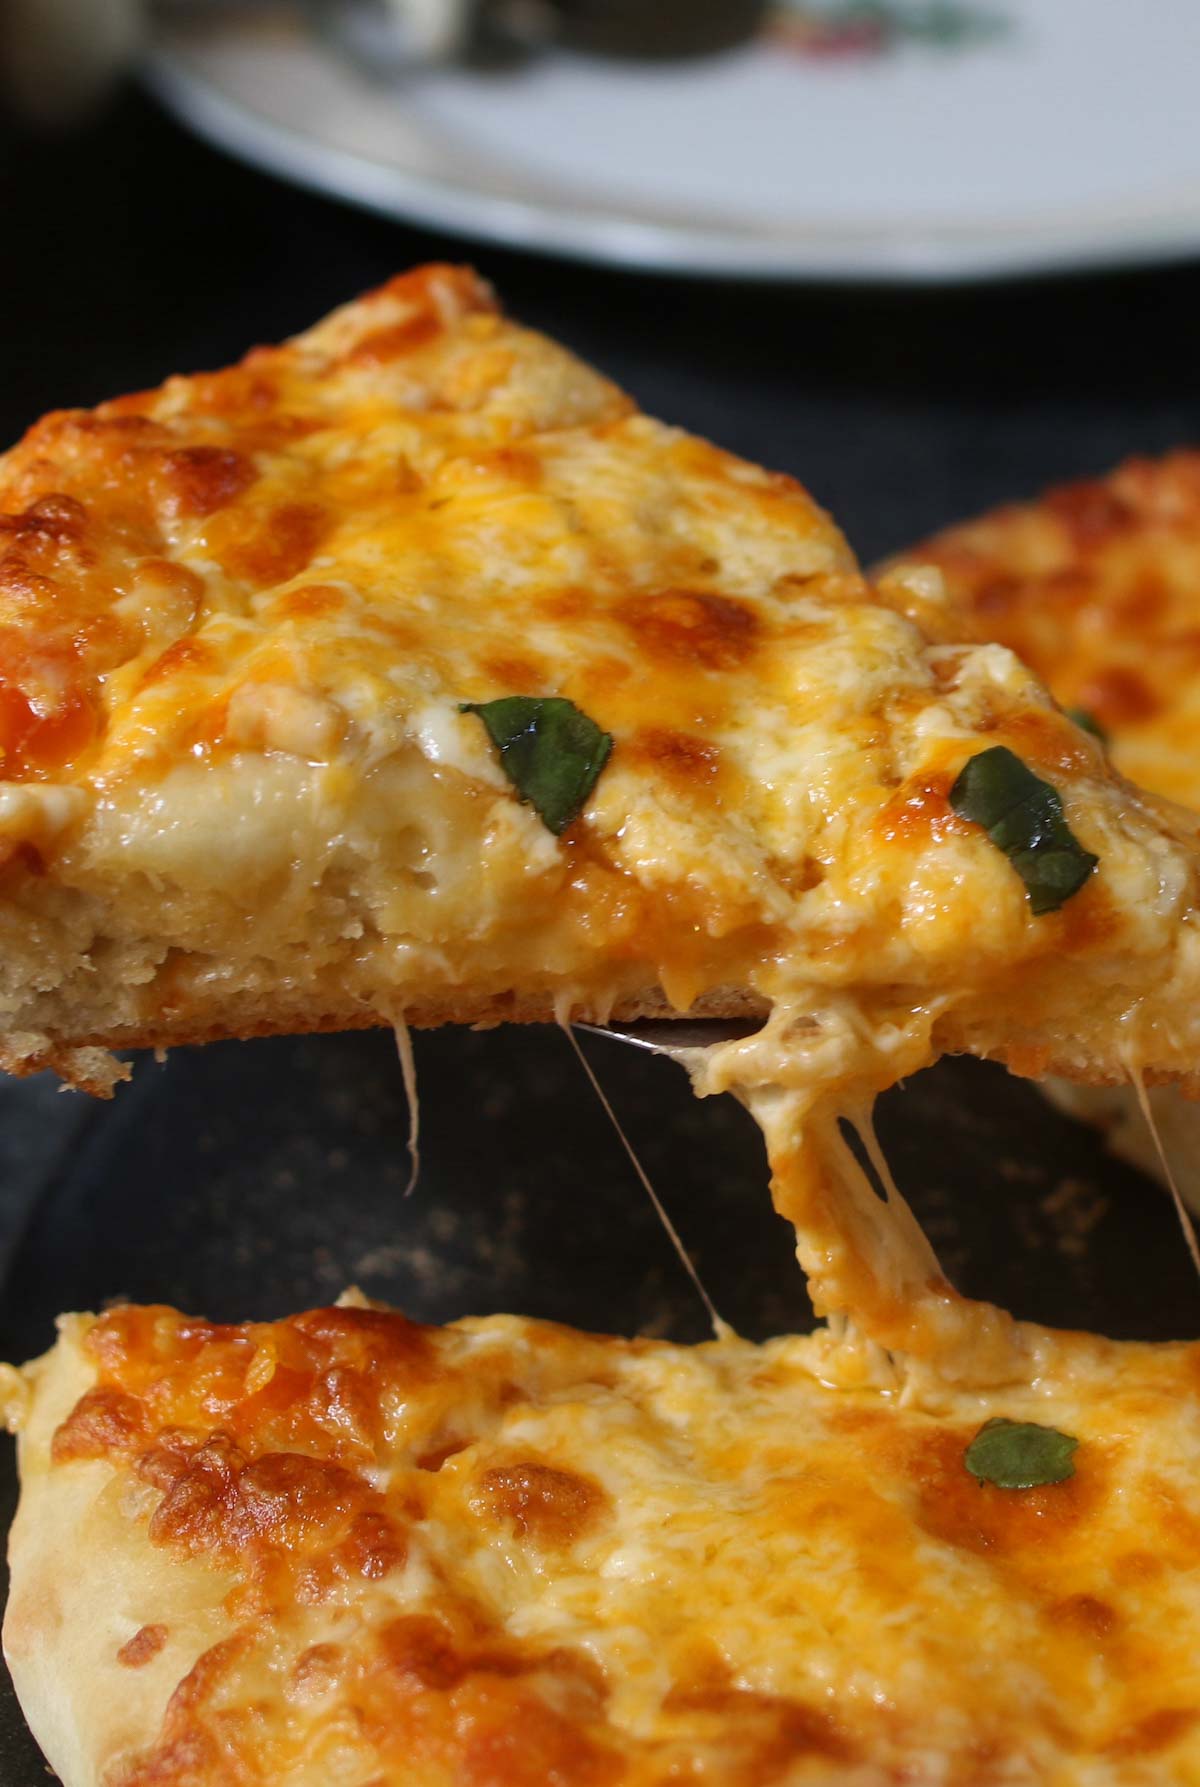 What could be better than remembering you have leftover pizza from last night? But what could be worse than soggy slices, burnt crusts and rubbery cheese? Reheating Leftover Pizza in the Oven properly can make it taste as good as freshly baked pizza with a crunchy crust.